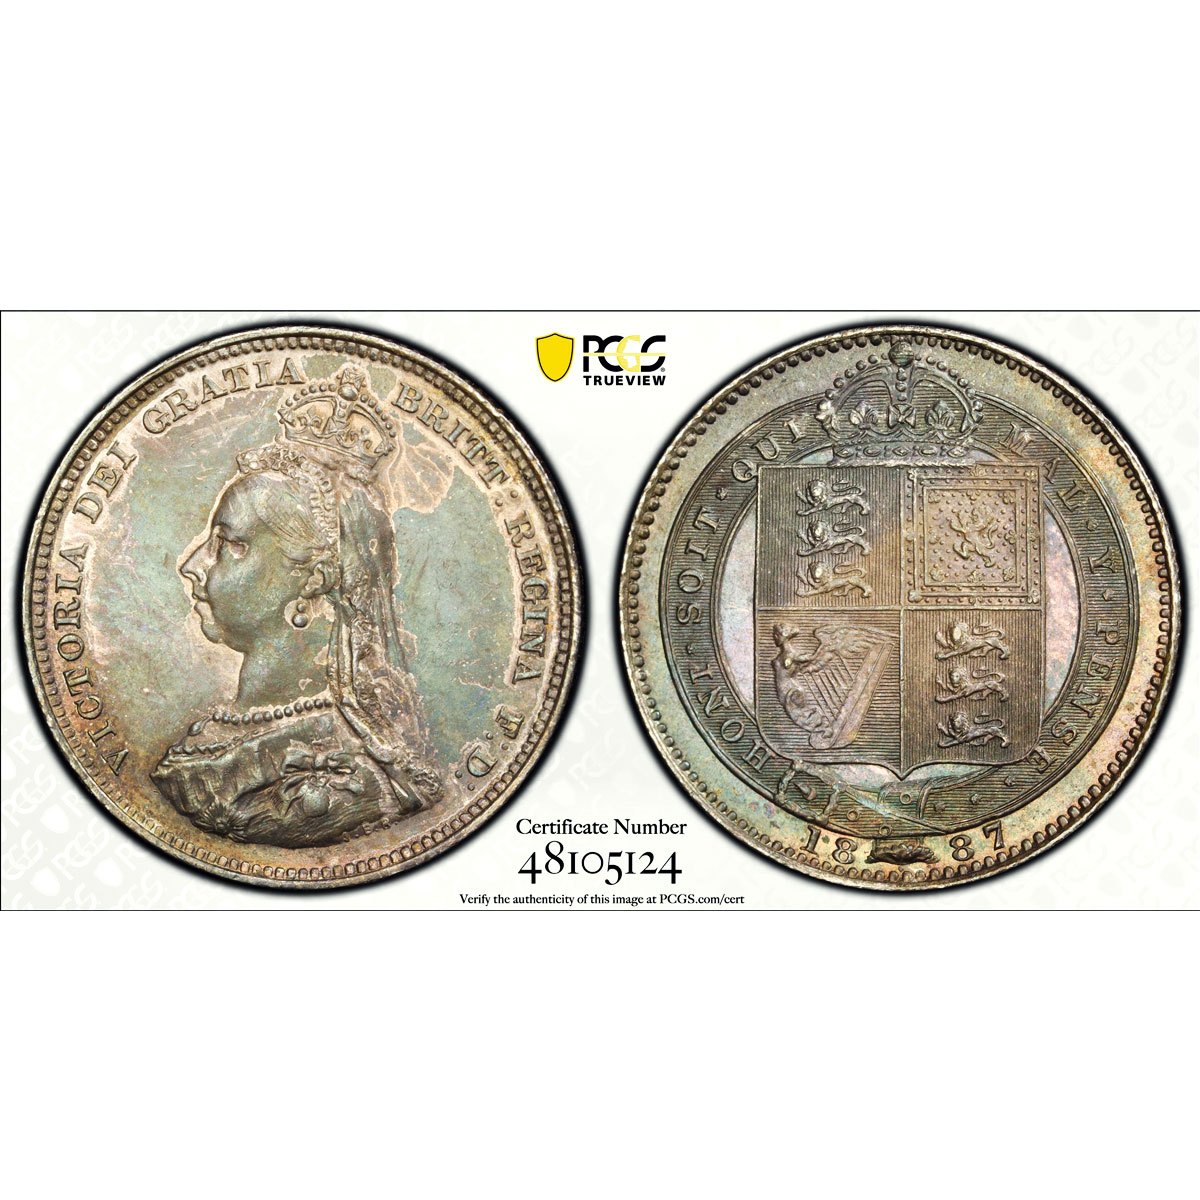 Gr Britain 1 shilling Regular Coinage Queen Victoria MS62 PCGS silver coin 1887